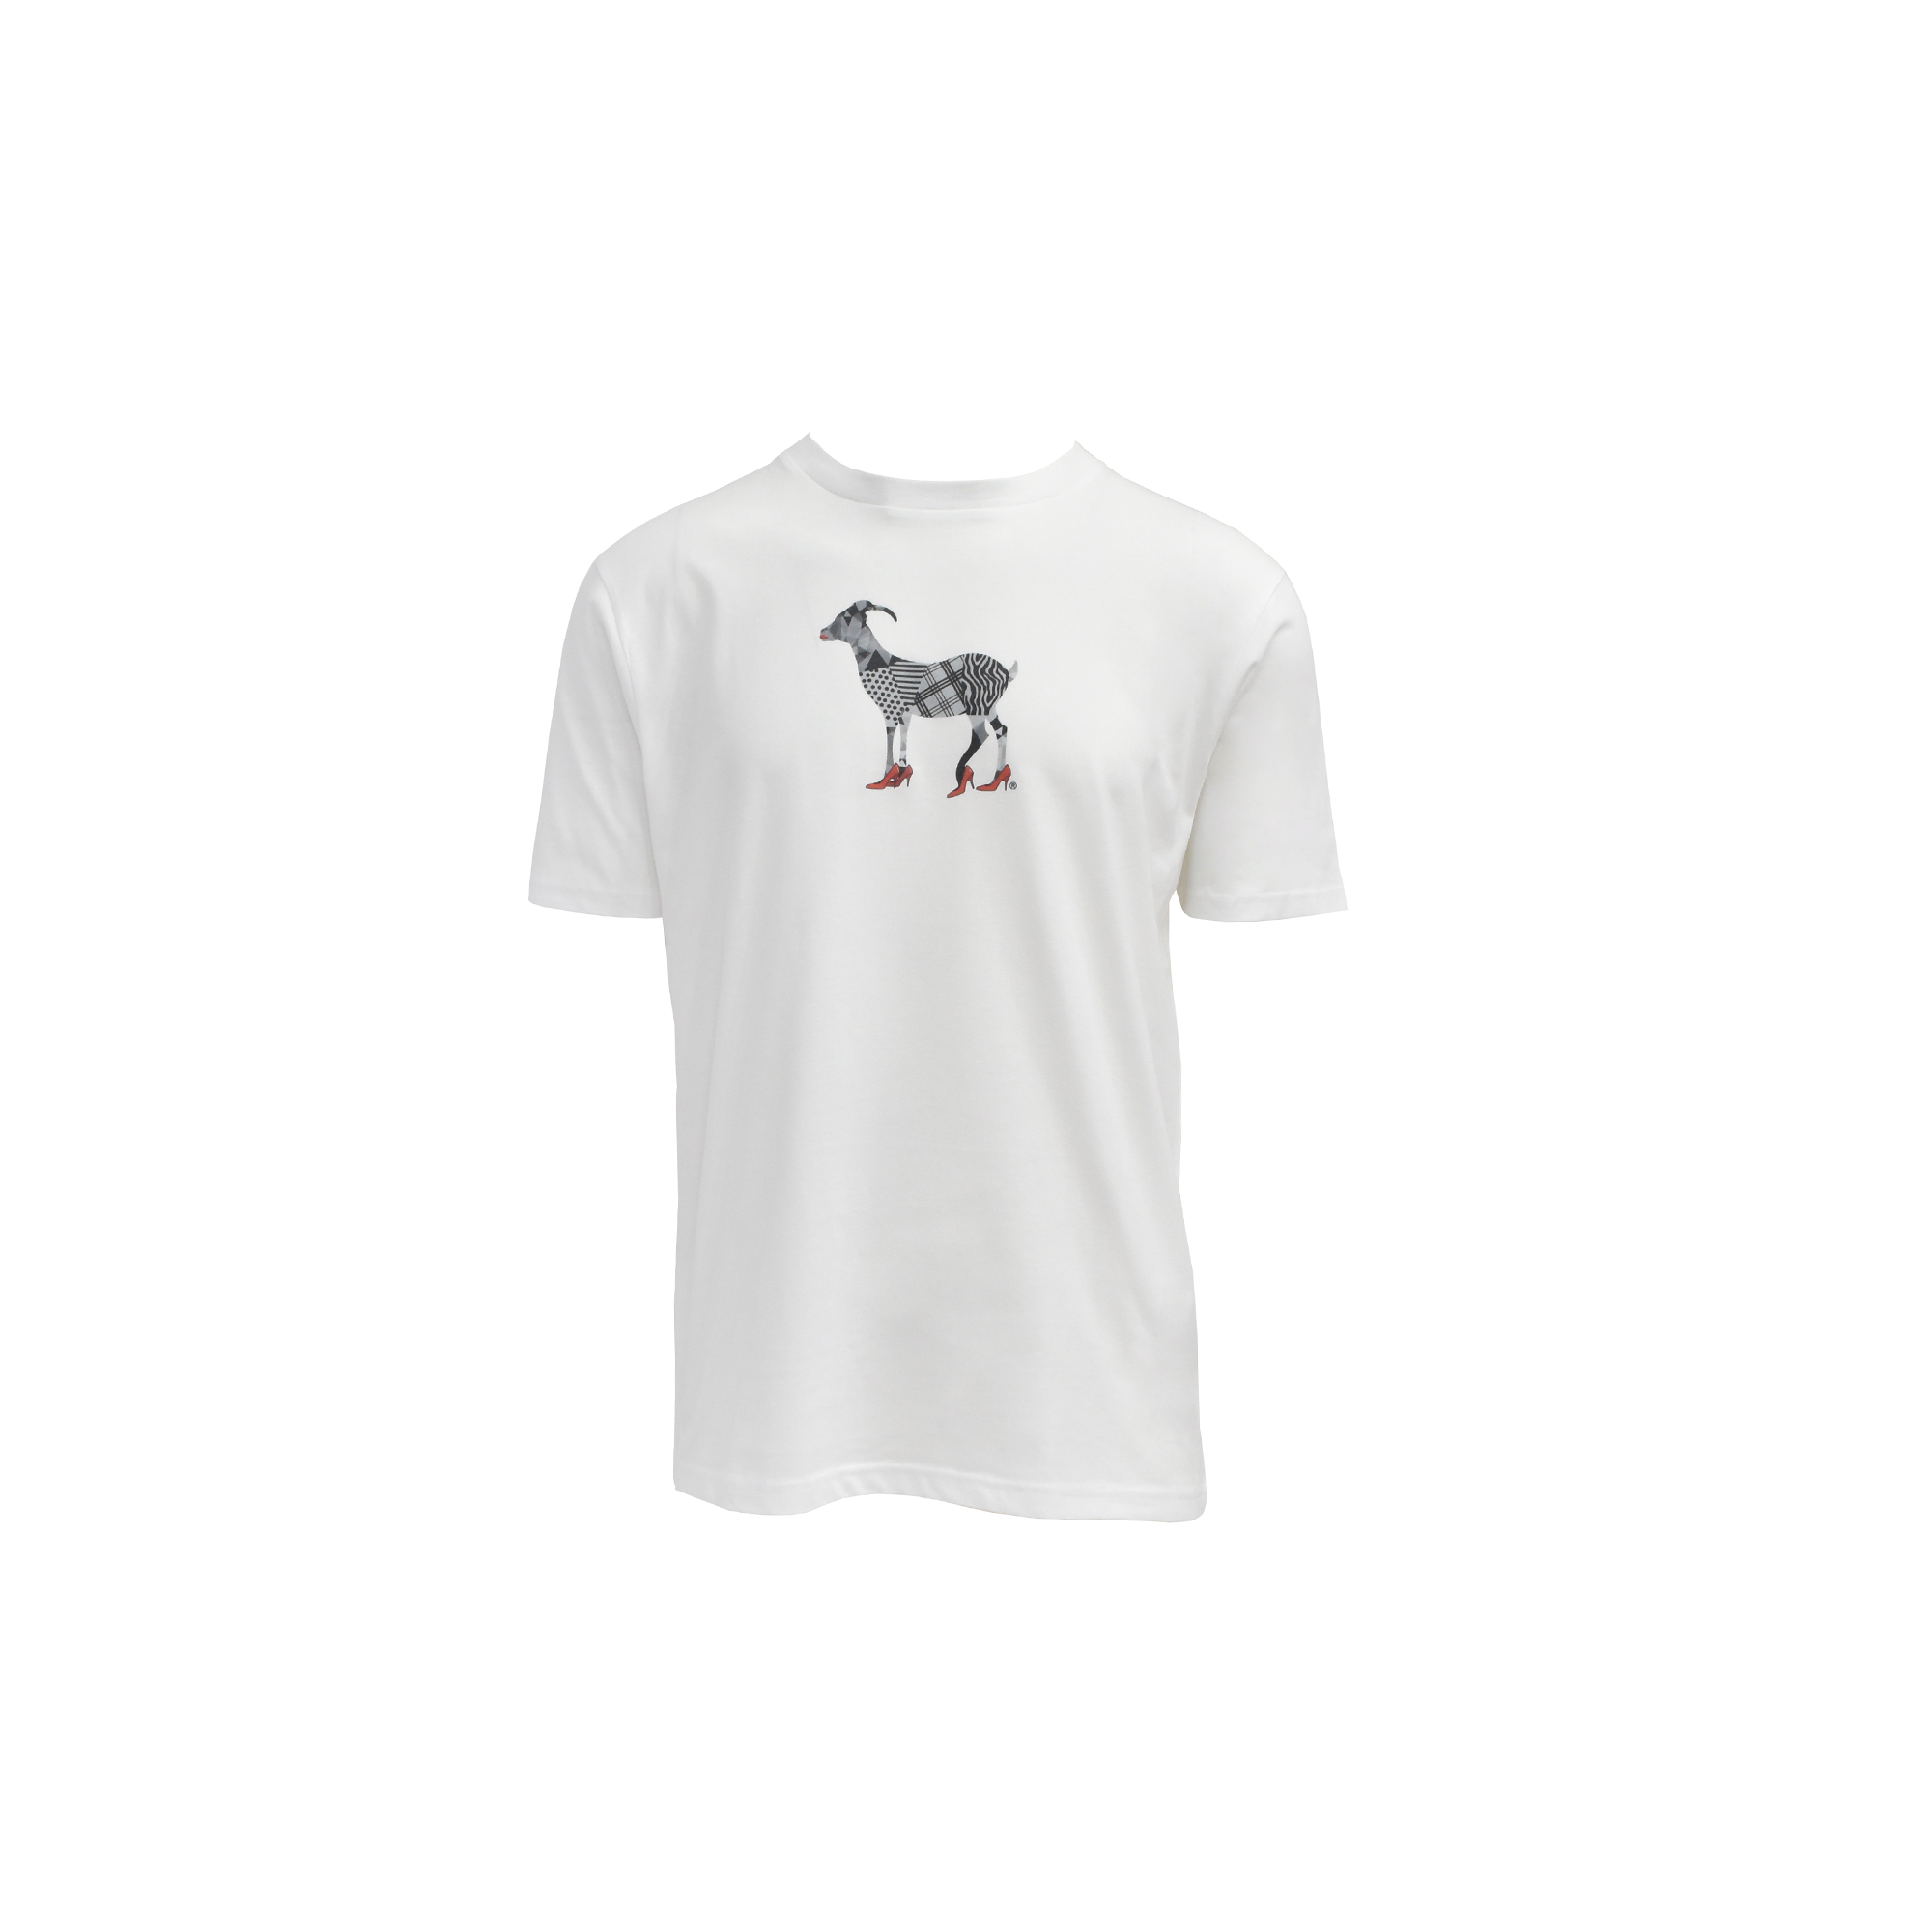 THE MOTLEY GOAT T-SHIRT - IN VOGUE WHITE